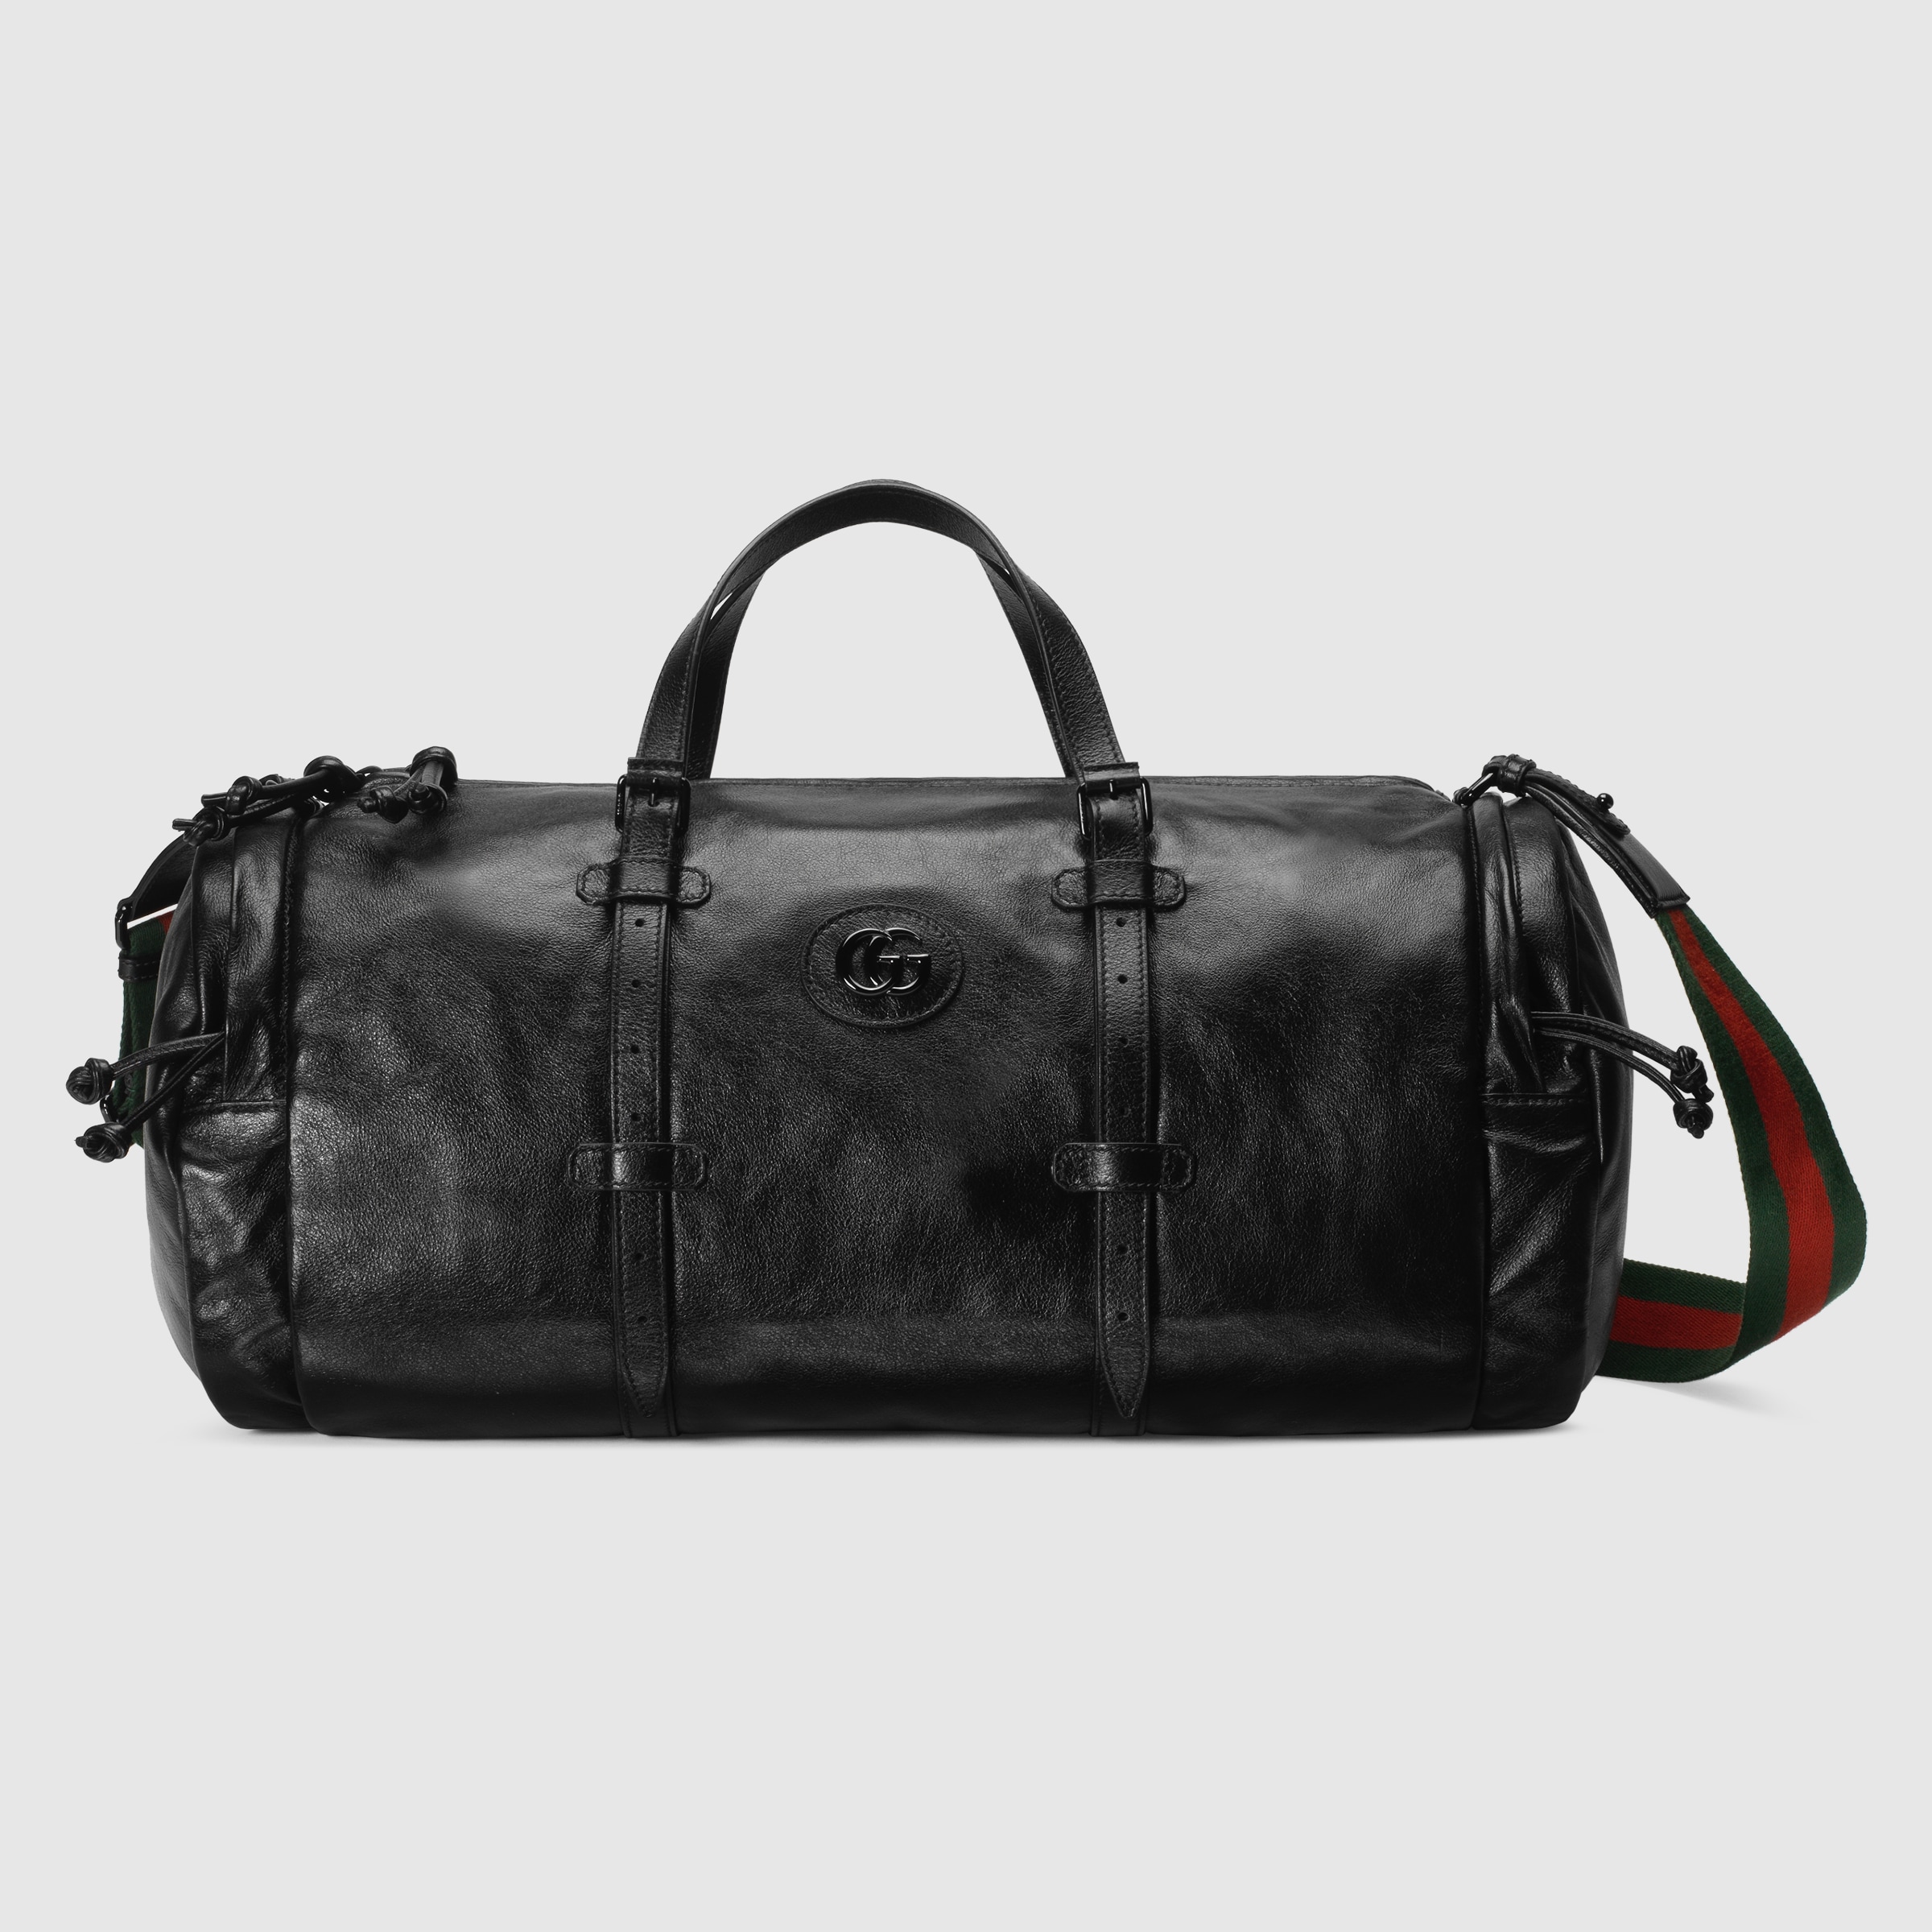 Gucci large duffle bag with tonal double g